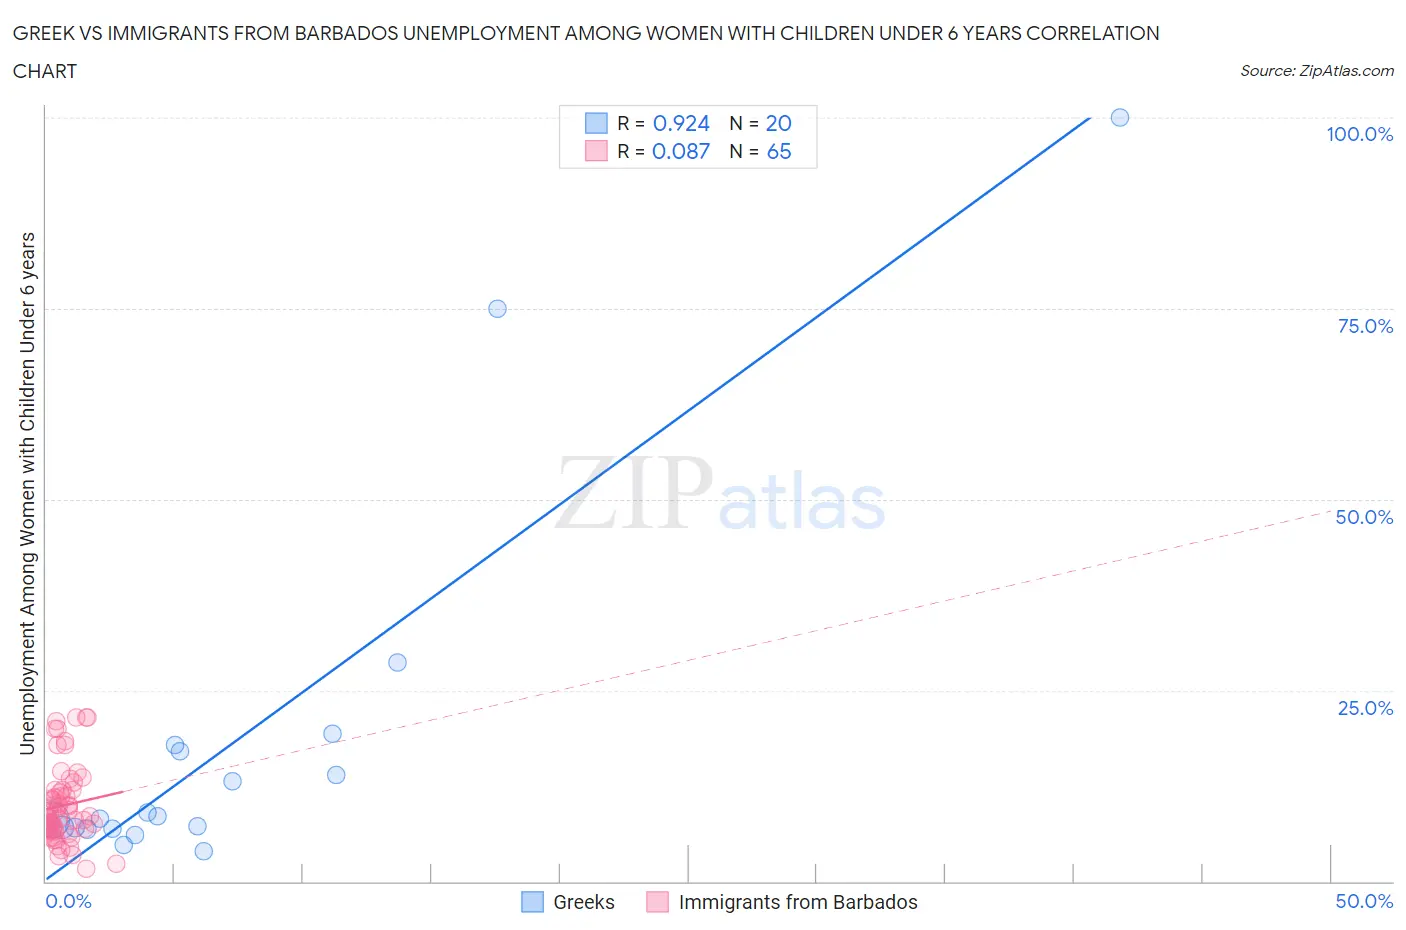 Greek vs Immigrants from Barbados Unemployment Among Women with Children Under 6 years